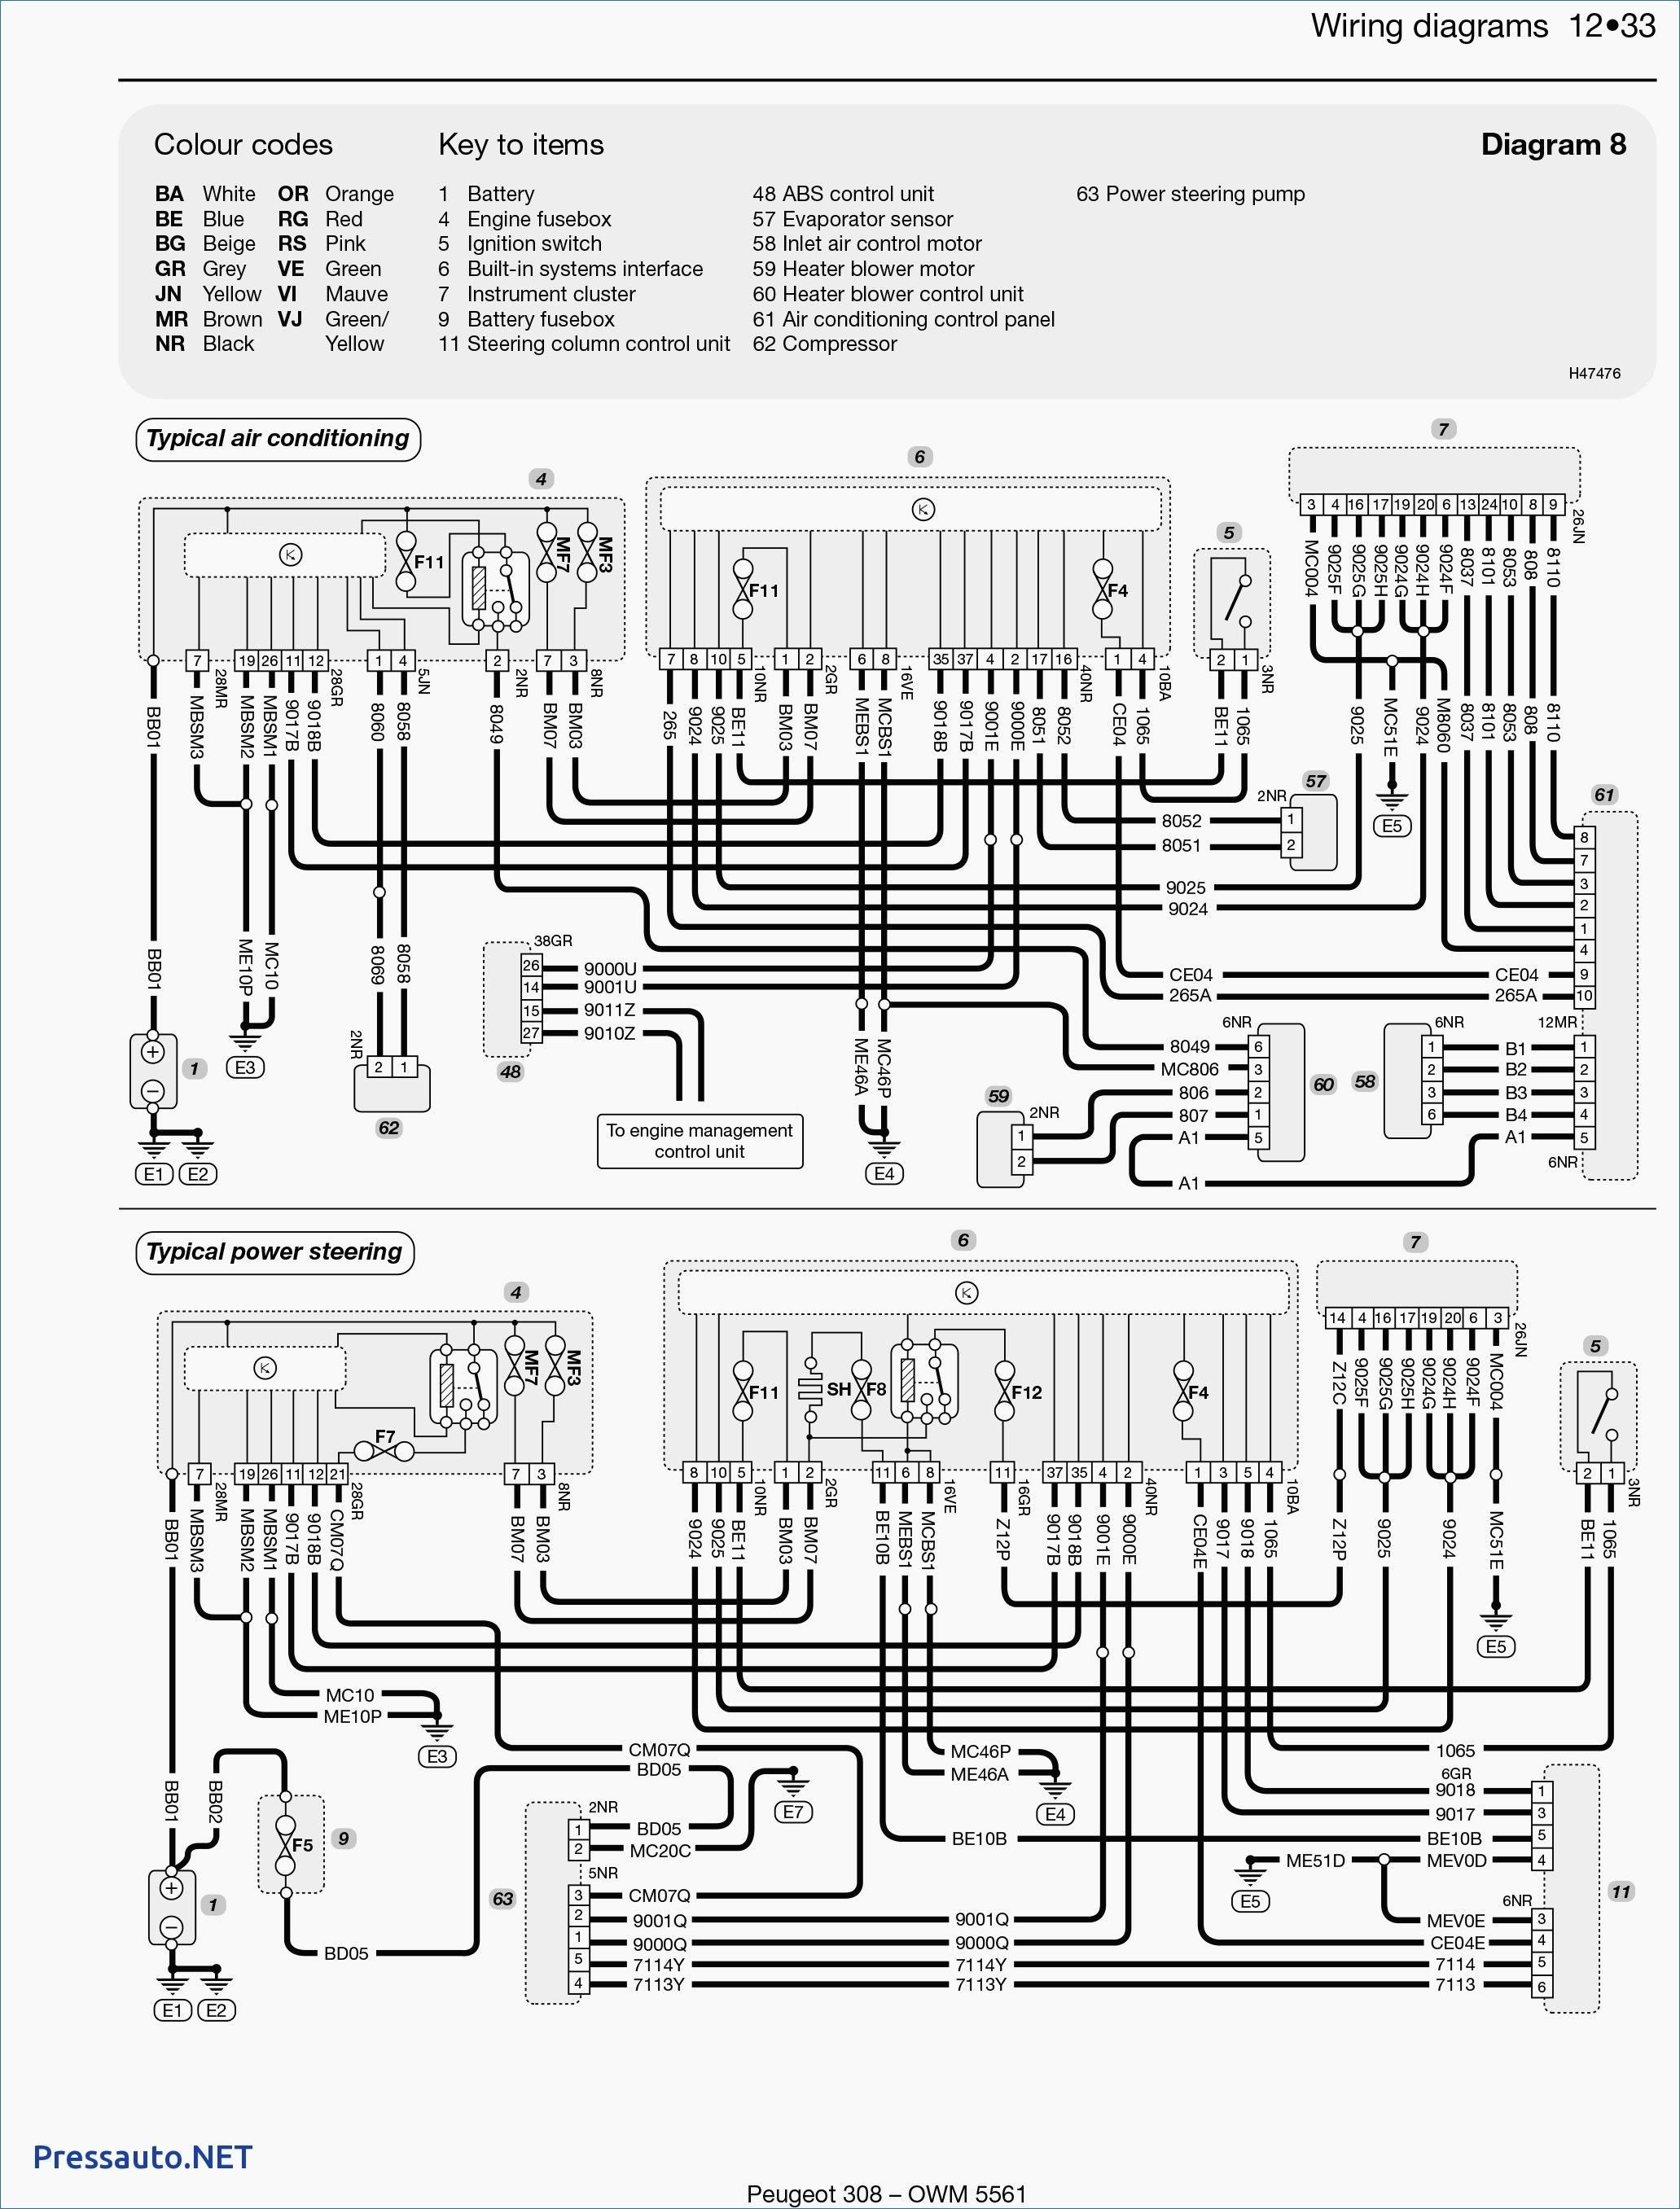 Peugeot 307 Hdi Engine Diagram Wiring Diagram for Peugeot 206 Stereo Best fortable In Of Peugeot 307 Hdi Engine Diagram